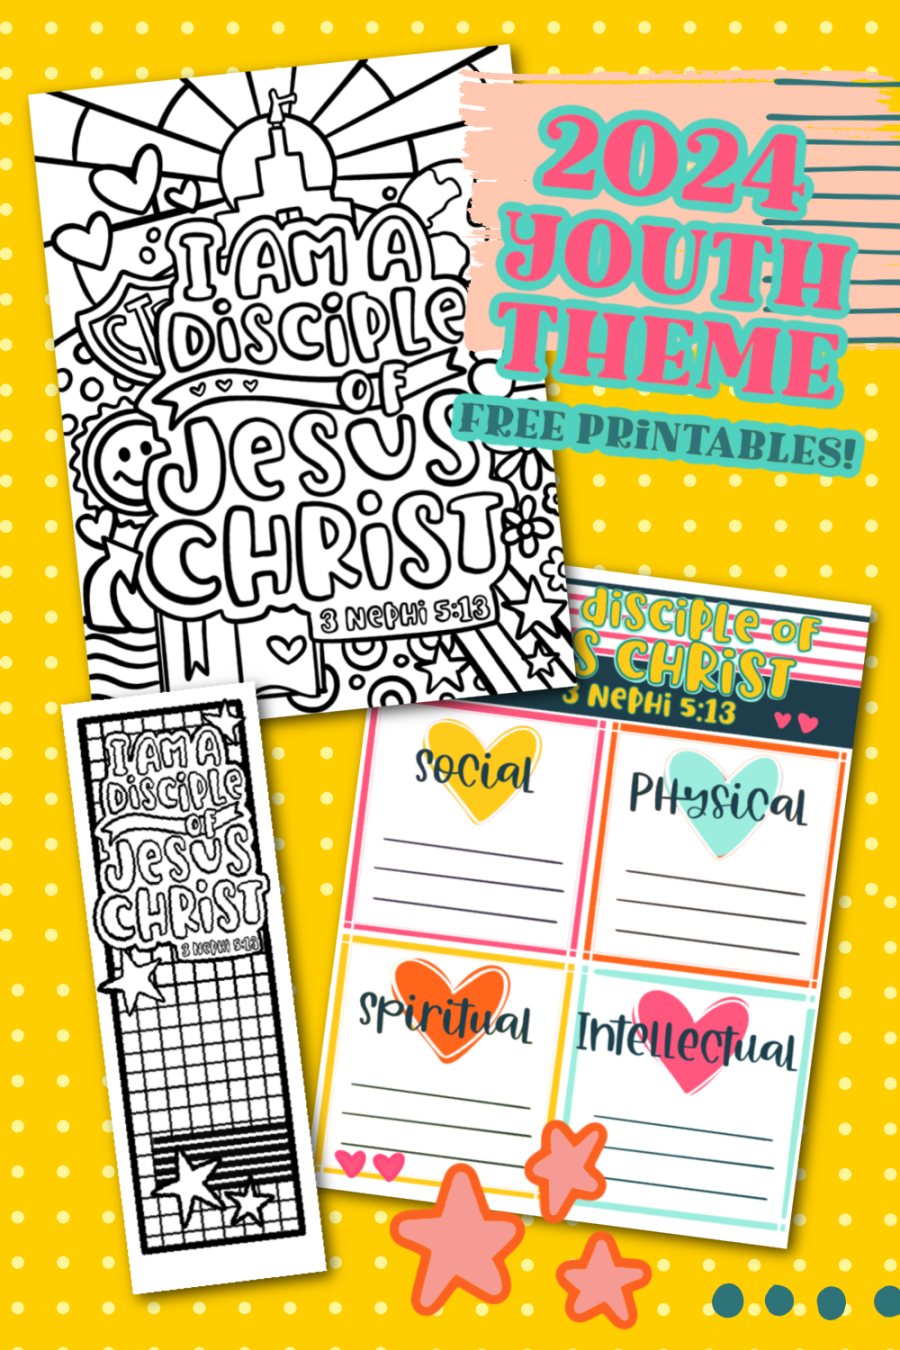 2024 youth theme free printables lds (1)